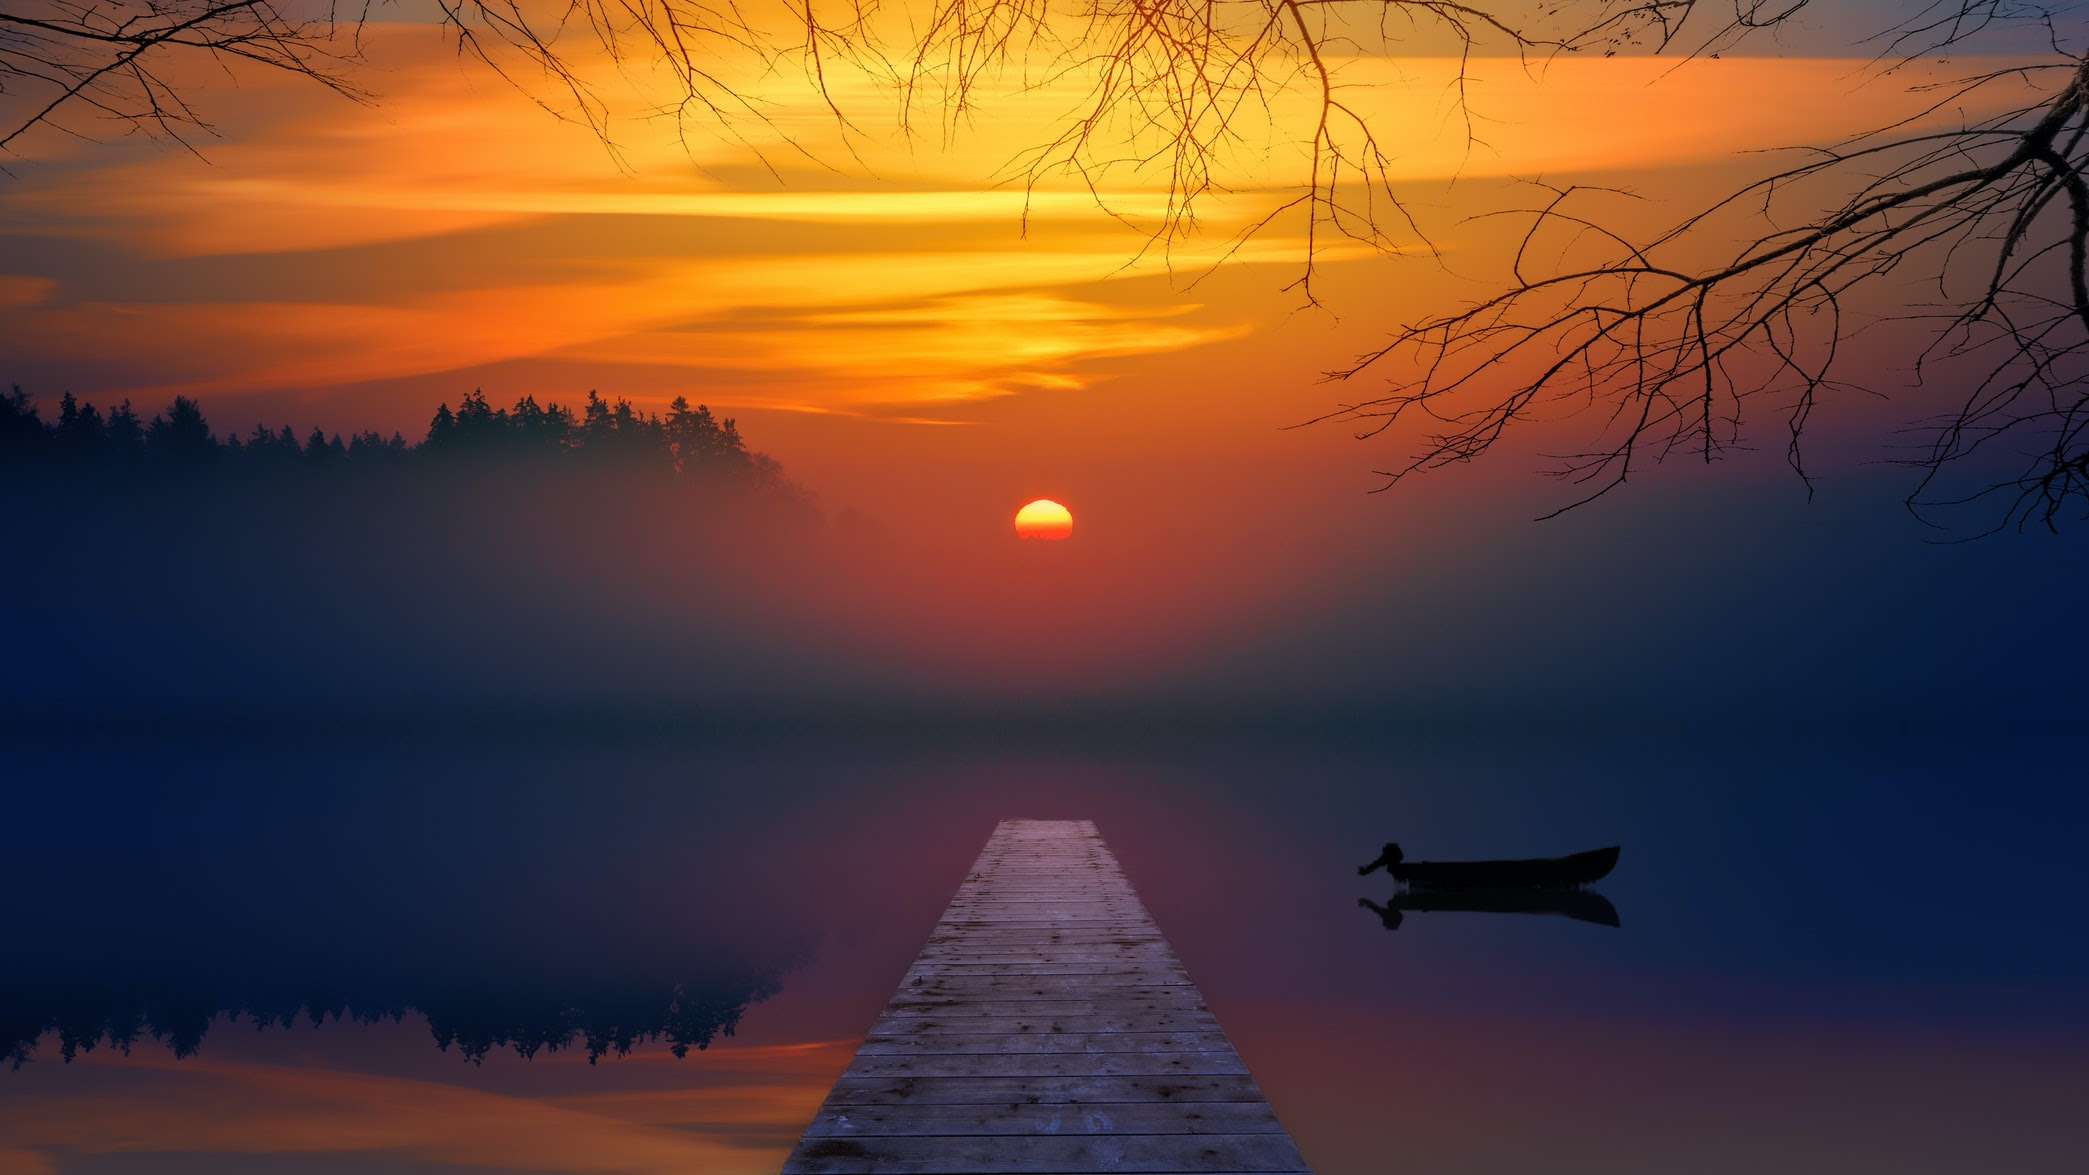 orange sunset in the mist over a lake with a dock and small rowboat